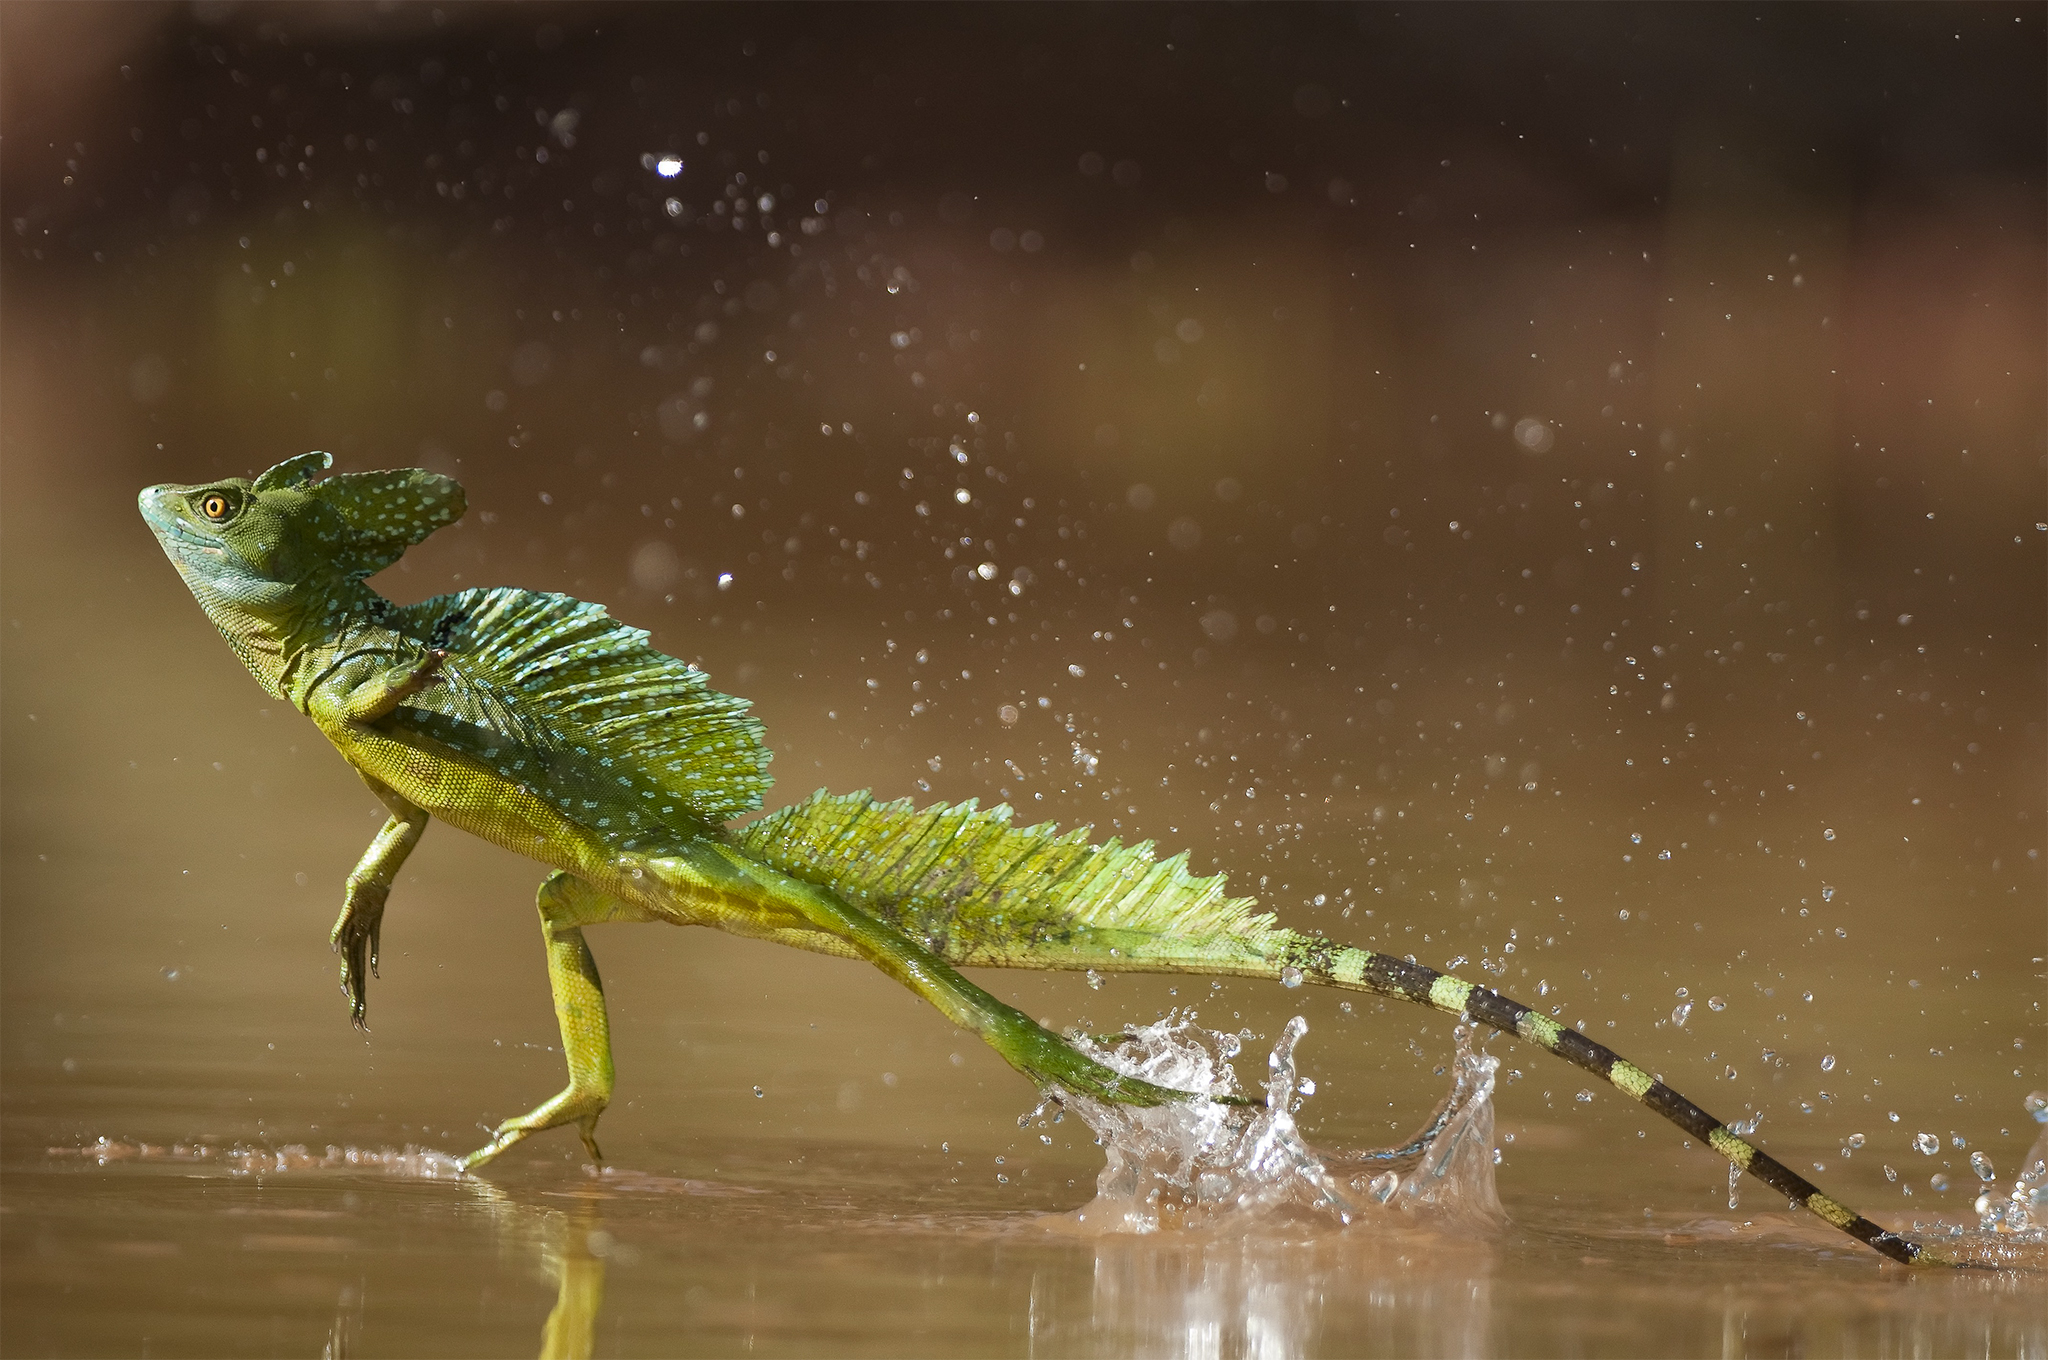 05 Nov 2008, Costa Rica --- Green / Double-crested basilisk (Basiliscus plumifrons) running across water surface, Santa Rita, Costa Rica --- Image by © Bence Mate/Nature Picture Library/Corbis